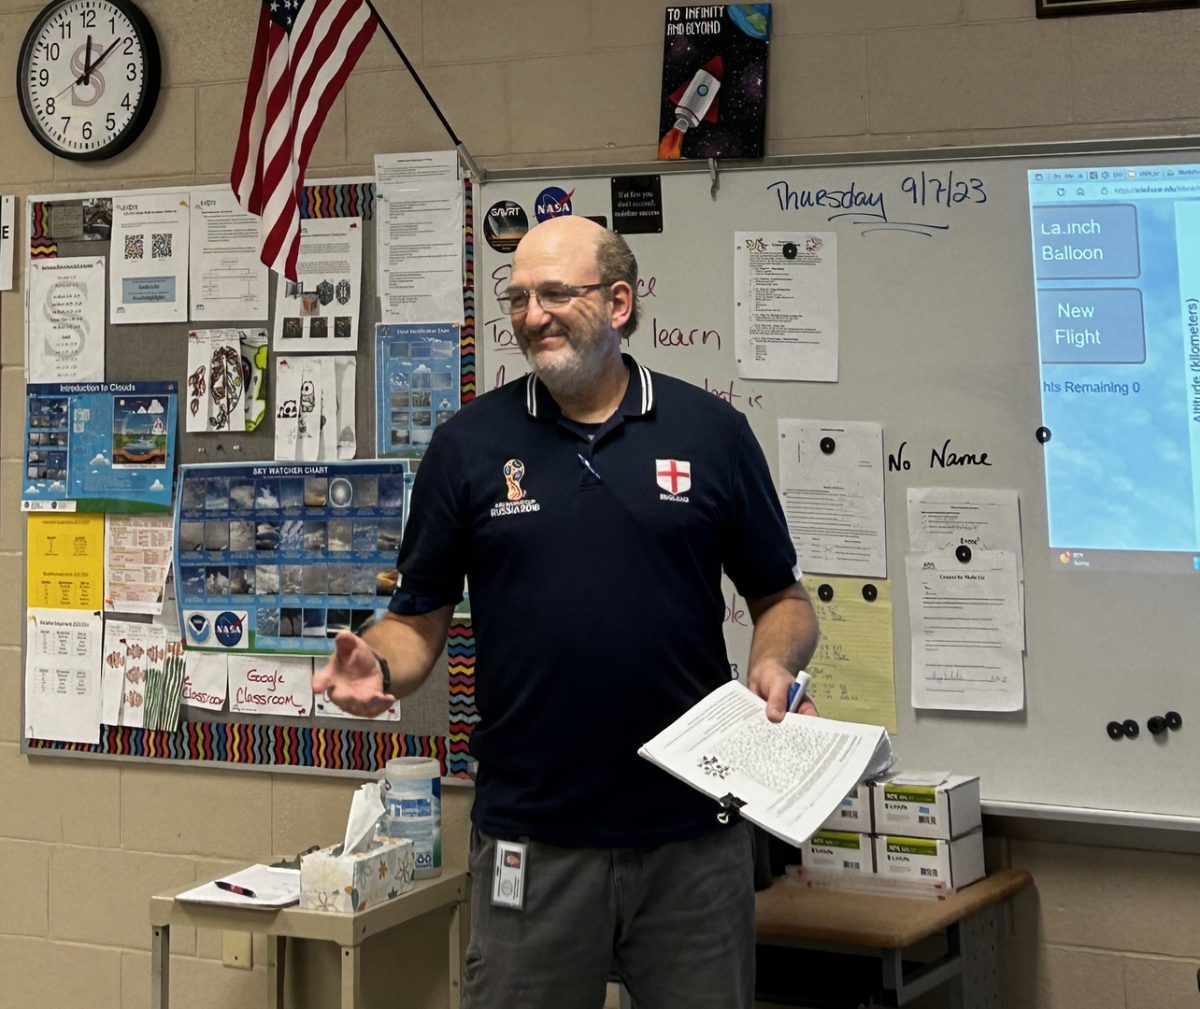 10th Grade Science Teacher Wins State Award for Teacher of the Year